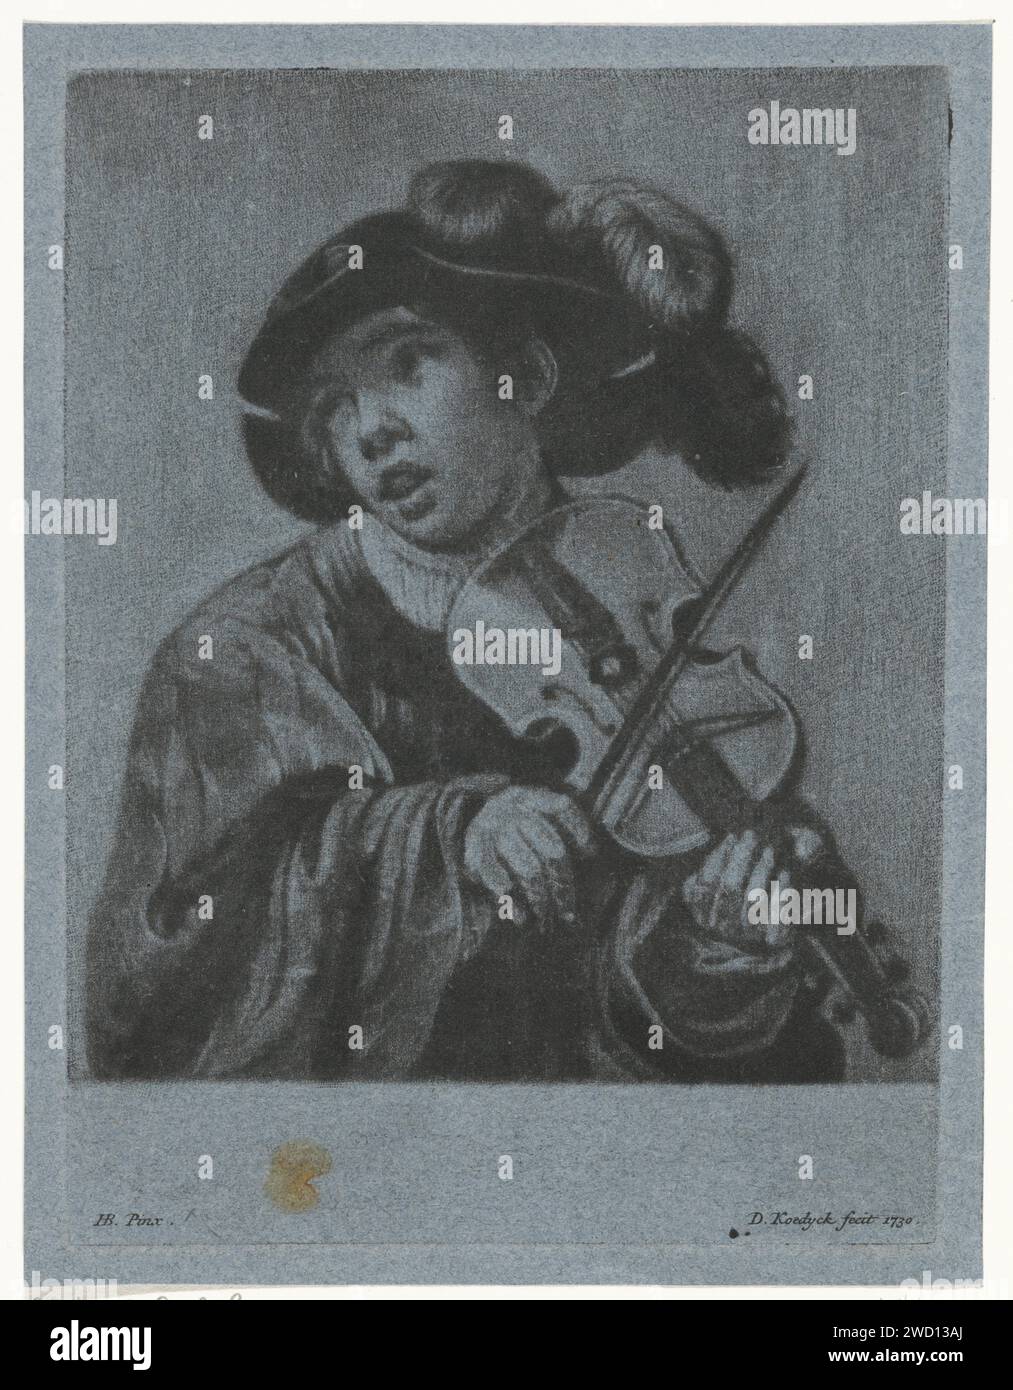 Violin player, Dirk Koedijck, after Hendrick ter Brugghen, 1730 print A boy, with a feathered hat on the head, plays a violin. Zaandam paper  one person playing string instrument (bowed). violin, fiddle Stock Photo